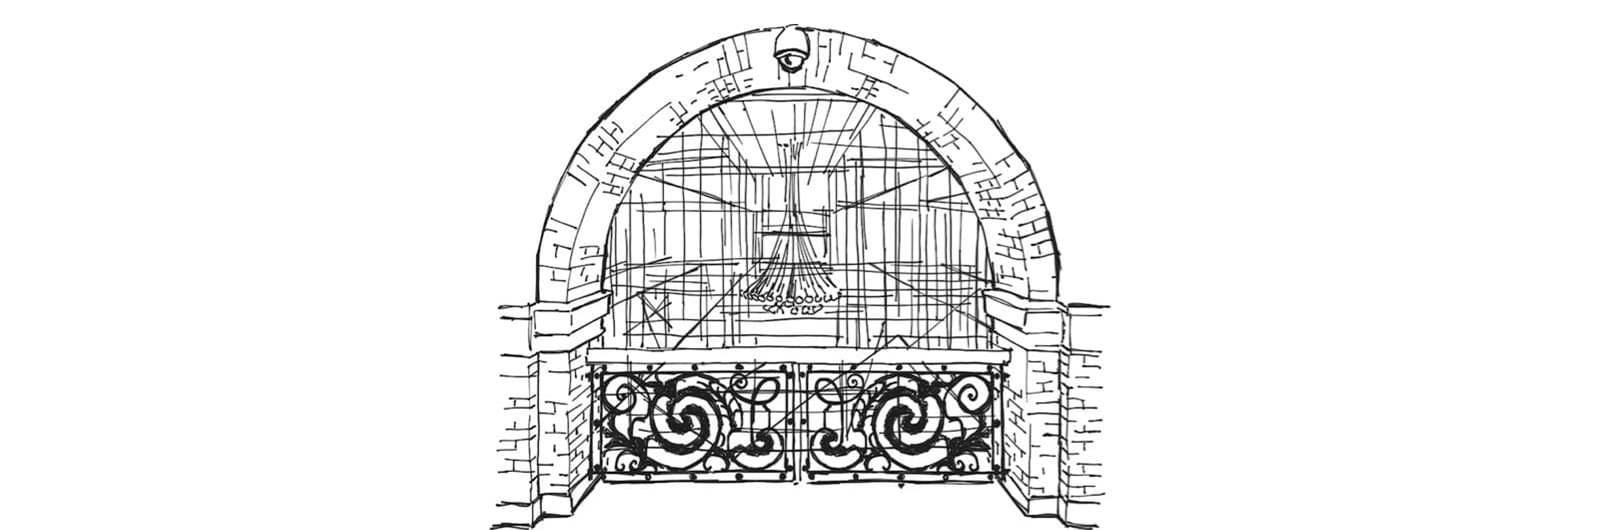 Student sketch of Main Building ceiling.